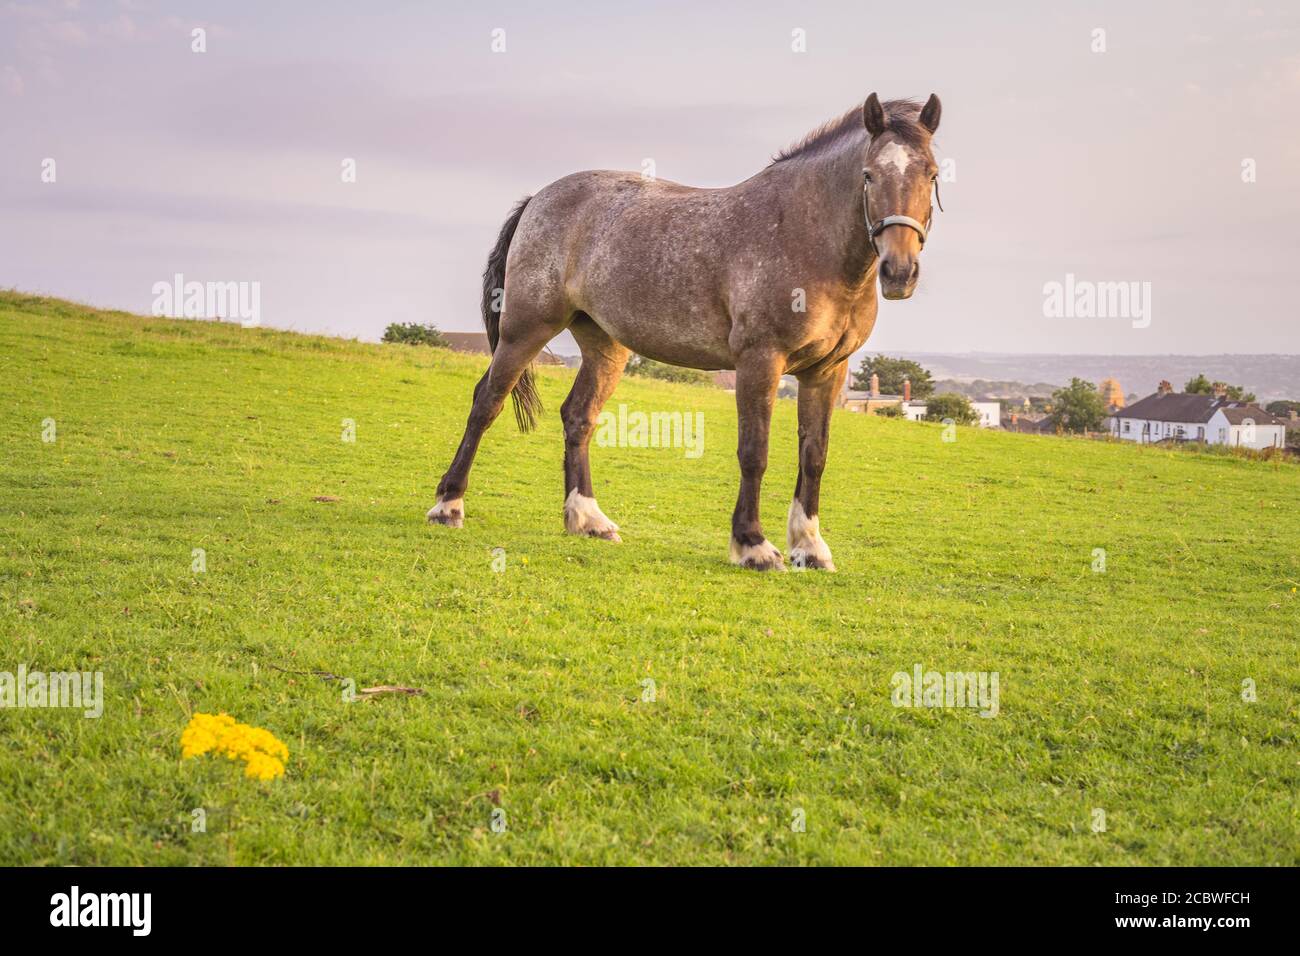 The horse is grazing on the field Stock Photo